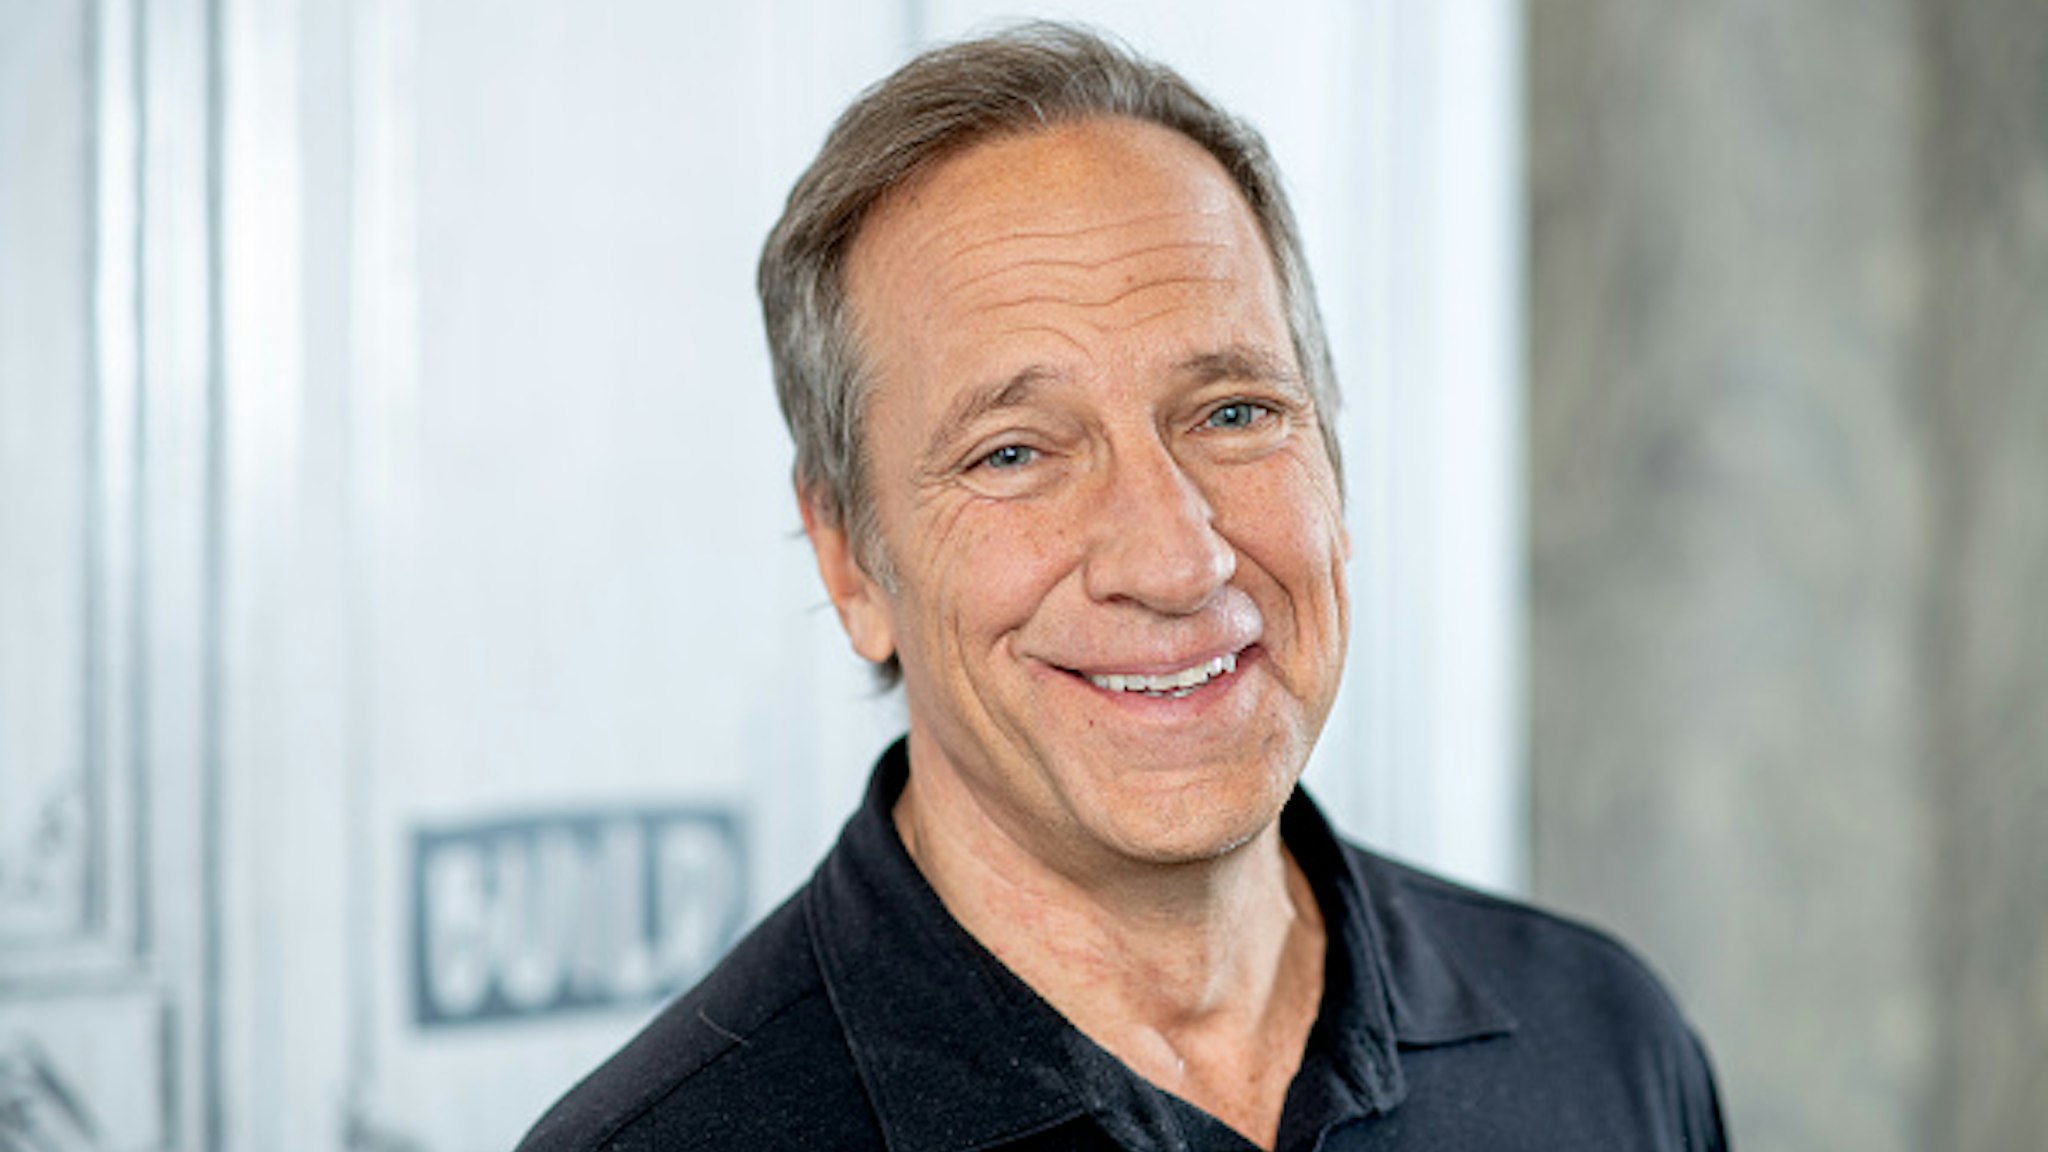 NEW YORK, NEW YORK - FEBRUARY 05: Mike Rowe discusses "Returning the Favor" with the Build Series at Build Studio on February 05, 2019 in New York City.